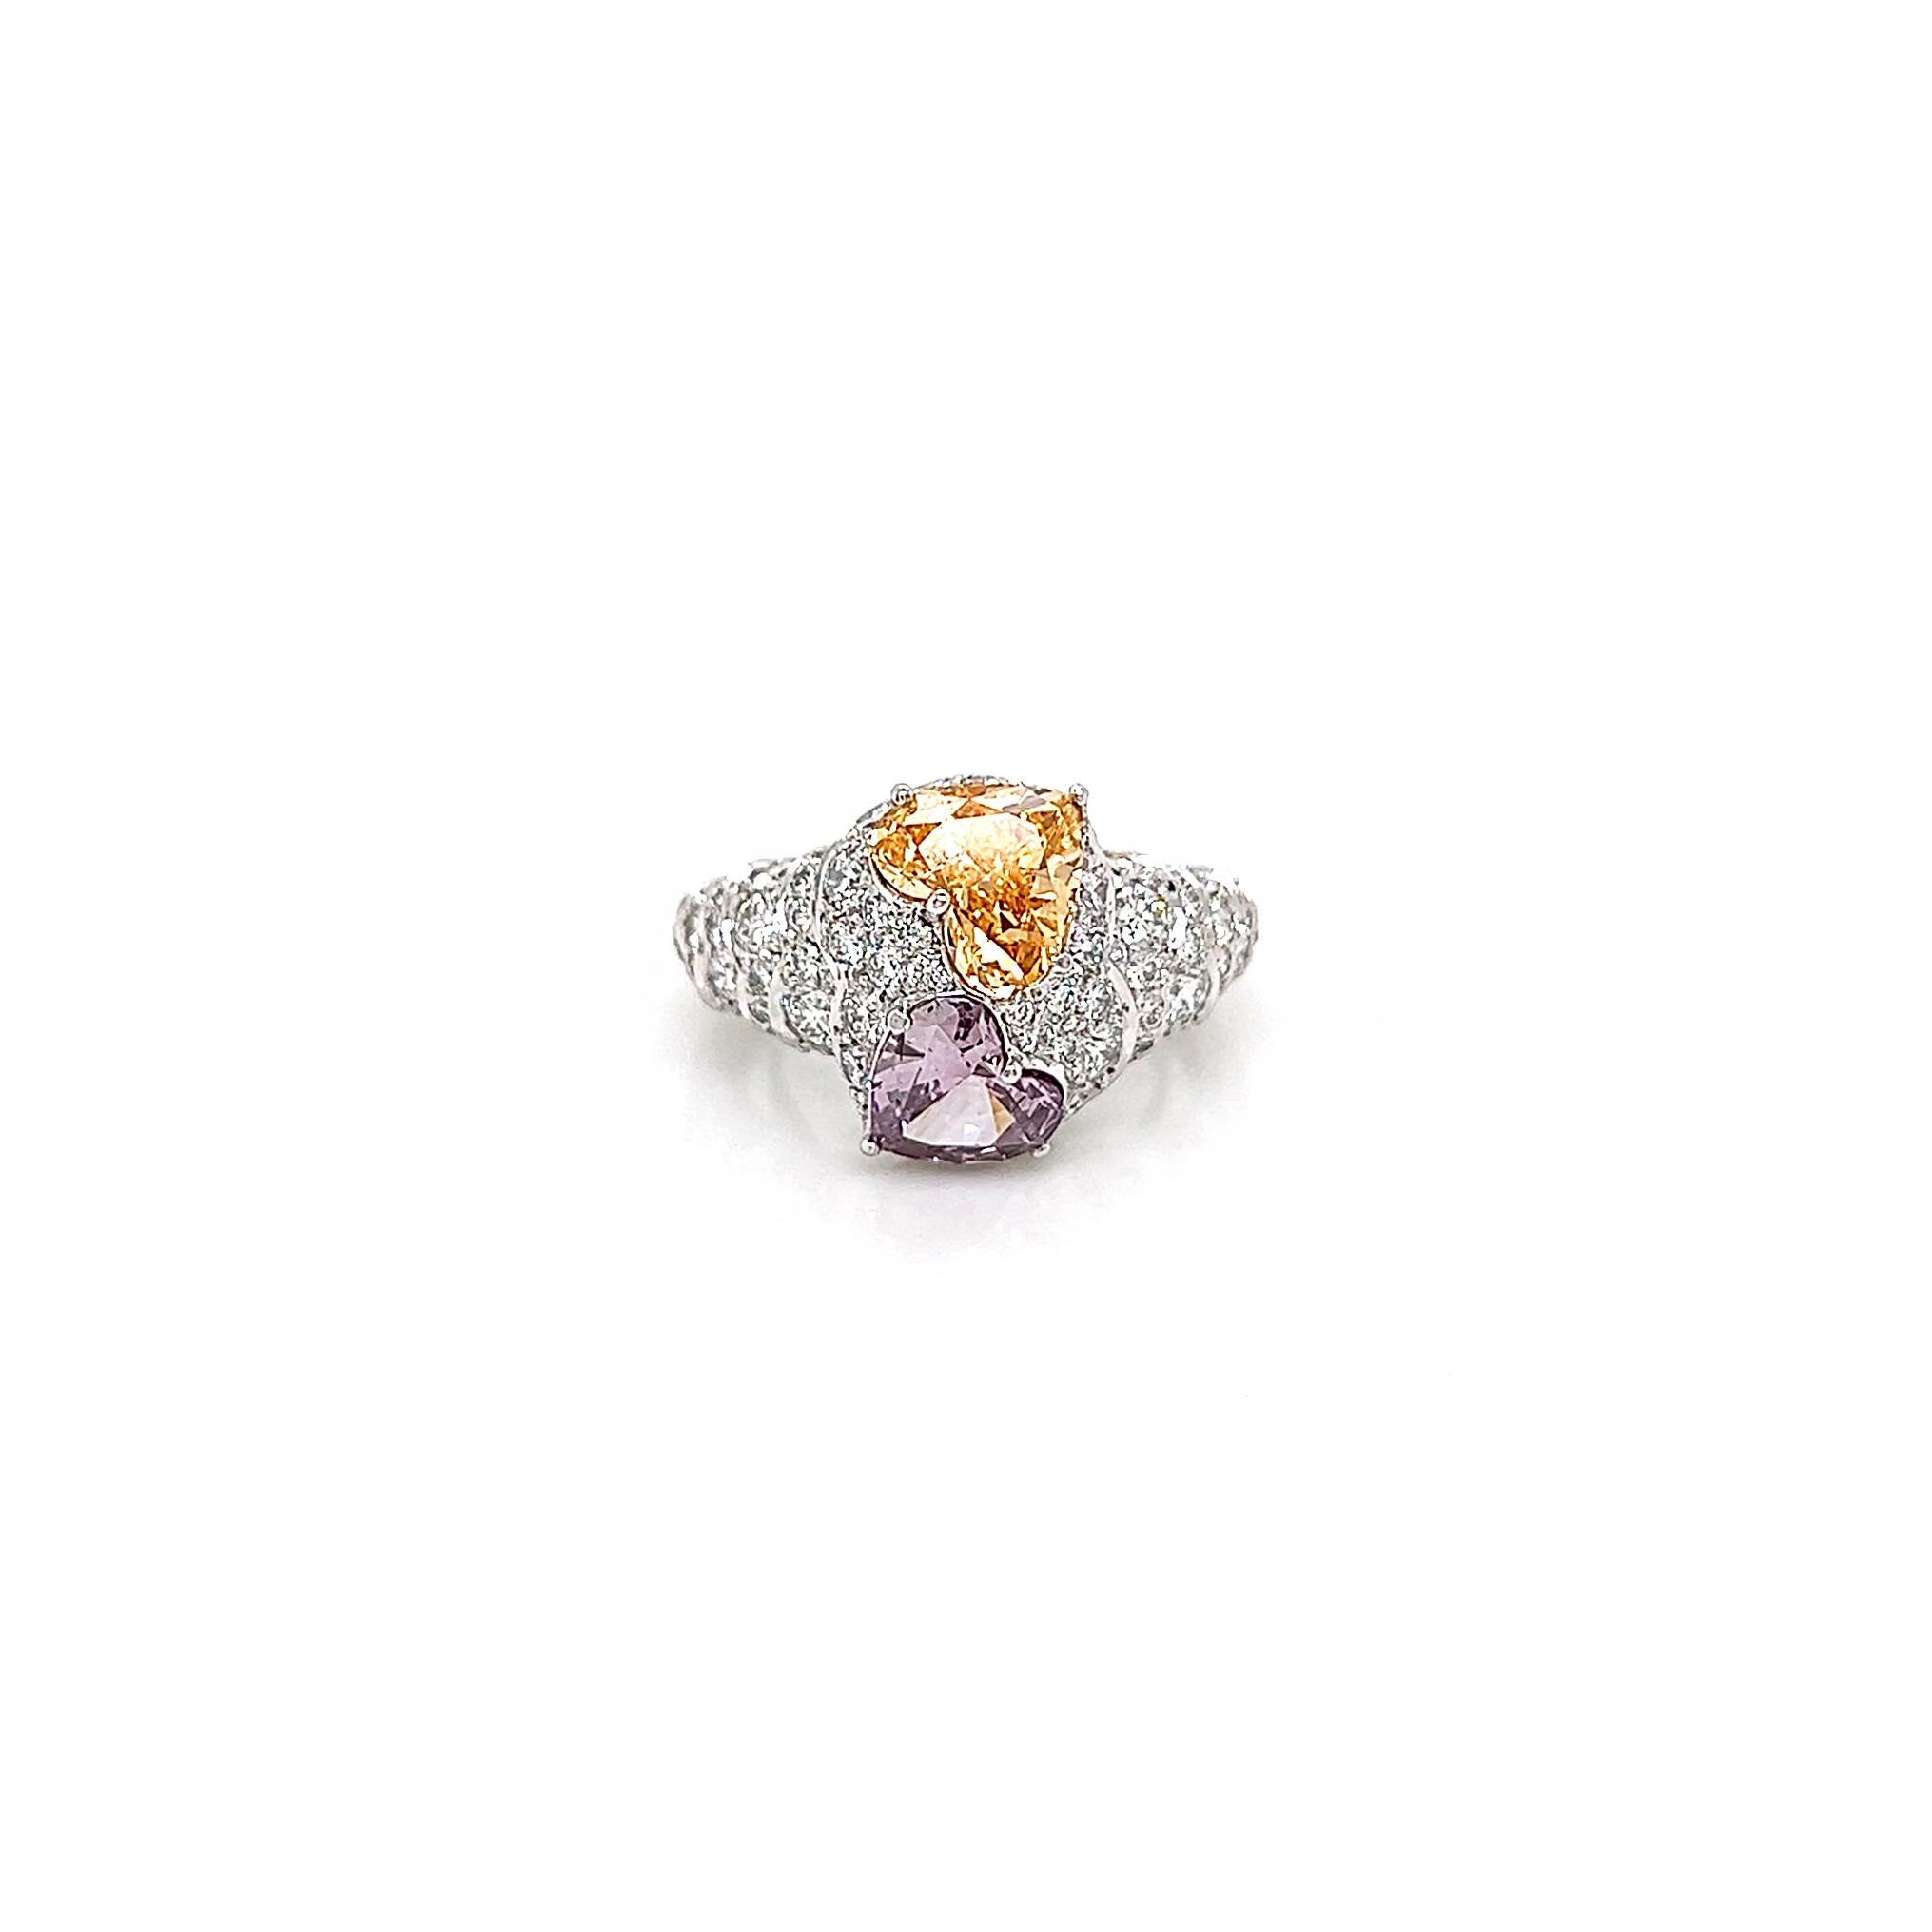 3.20 Total Carat Fancy Purple&Yellow Diamond Ladies Engagement Ring. GIA Certified.

It is the definition of a statement ring. This one-of-a-kind ring is not for the faint-hearted. The duet of natural yellow diamond and purple diamond will make the